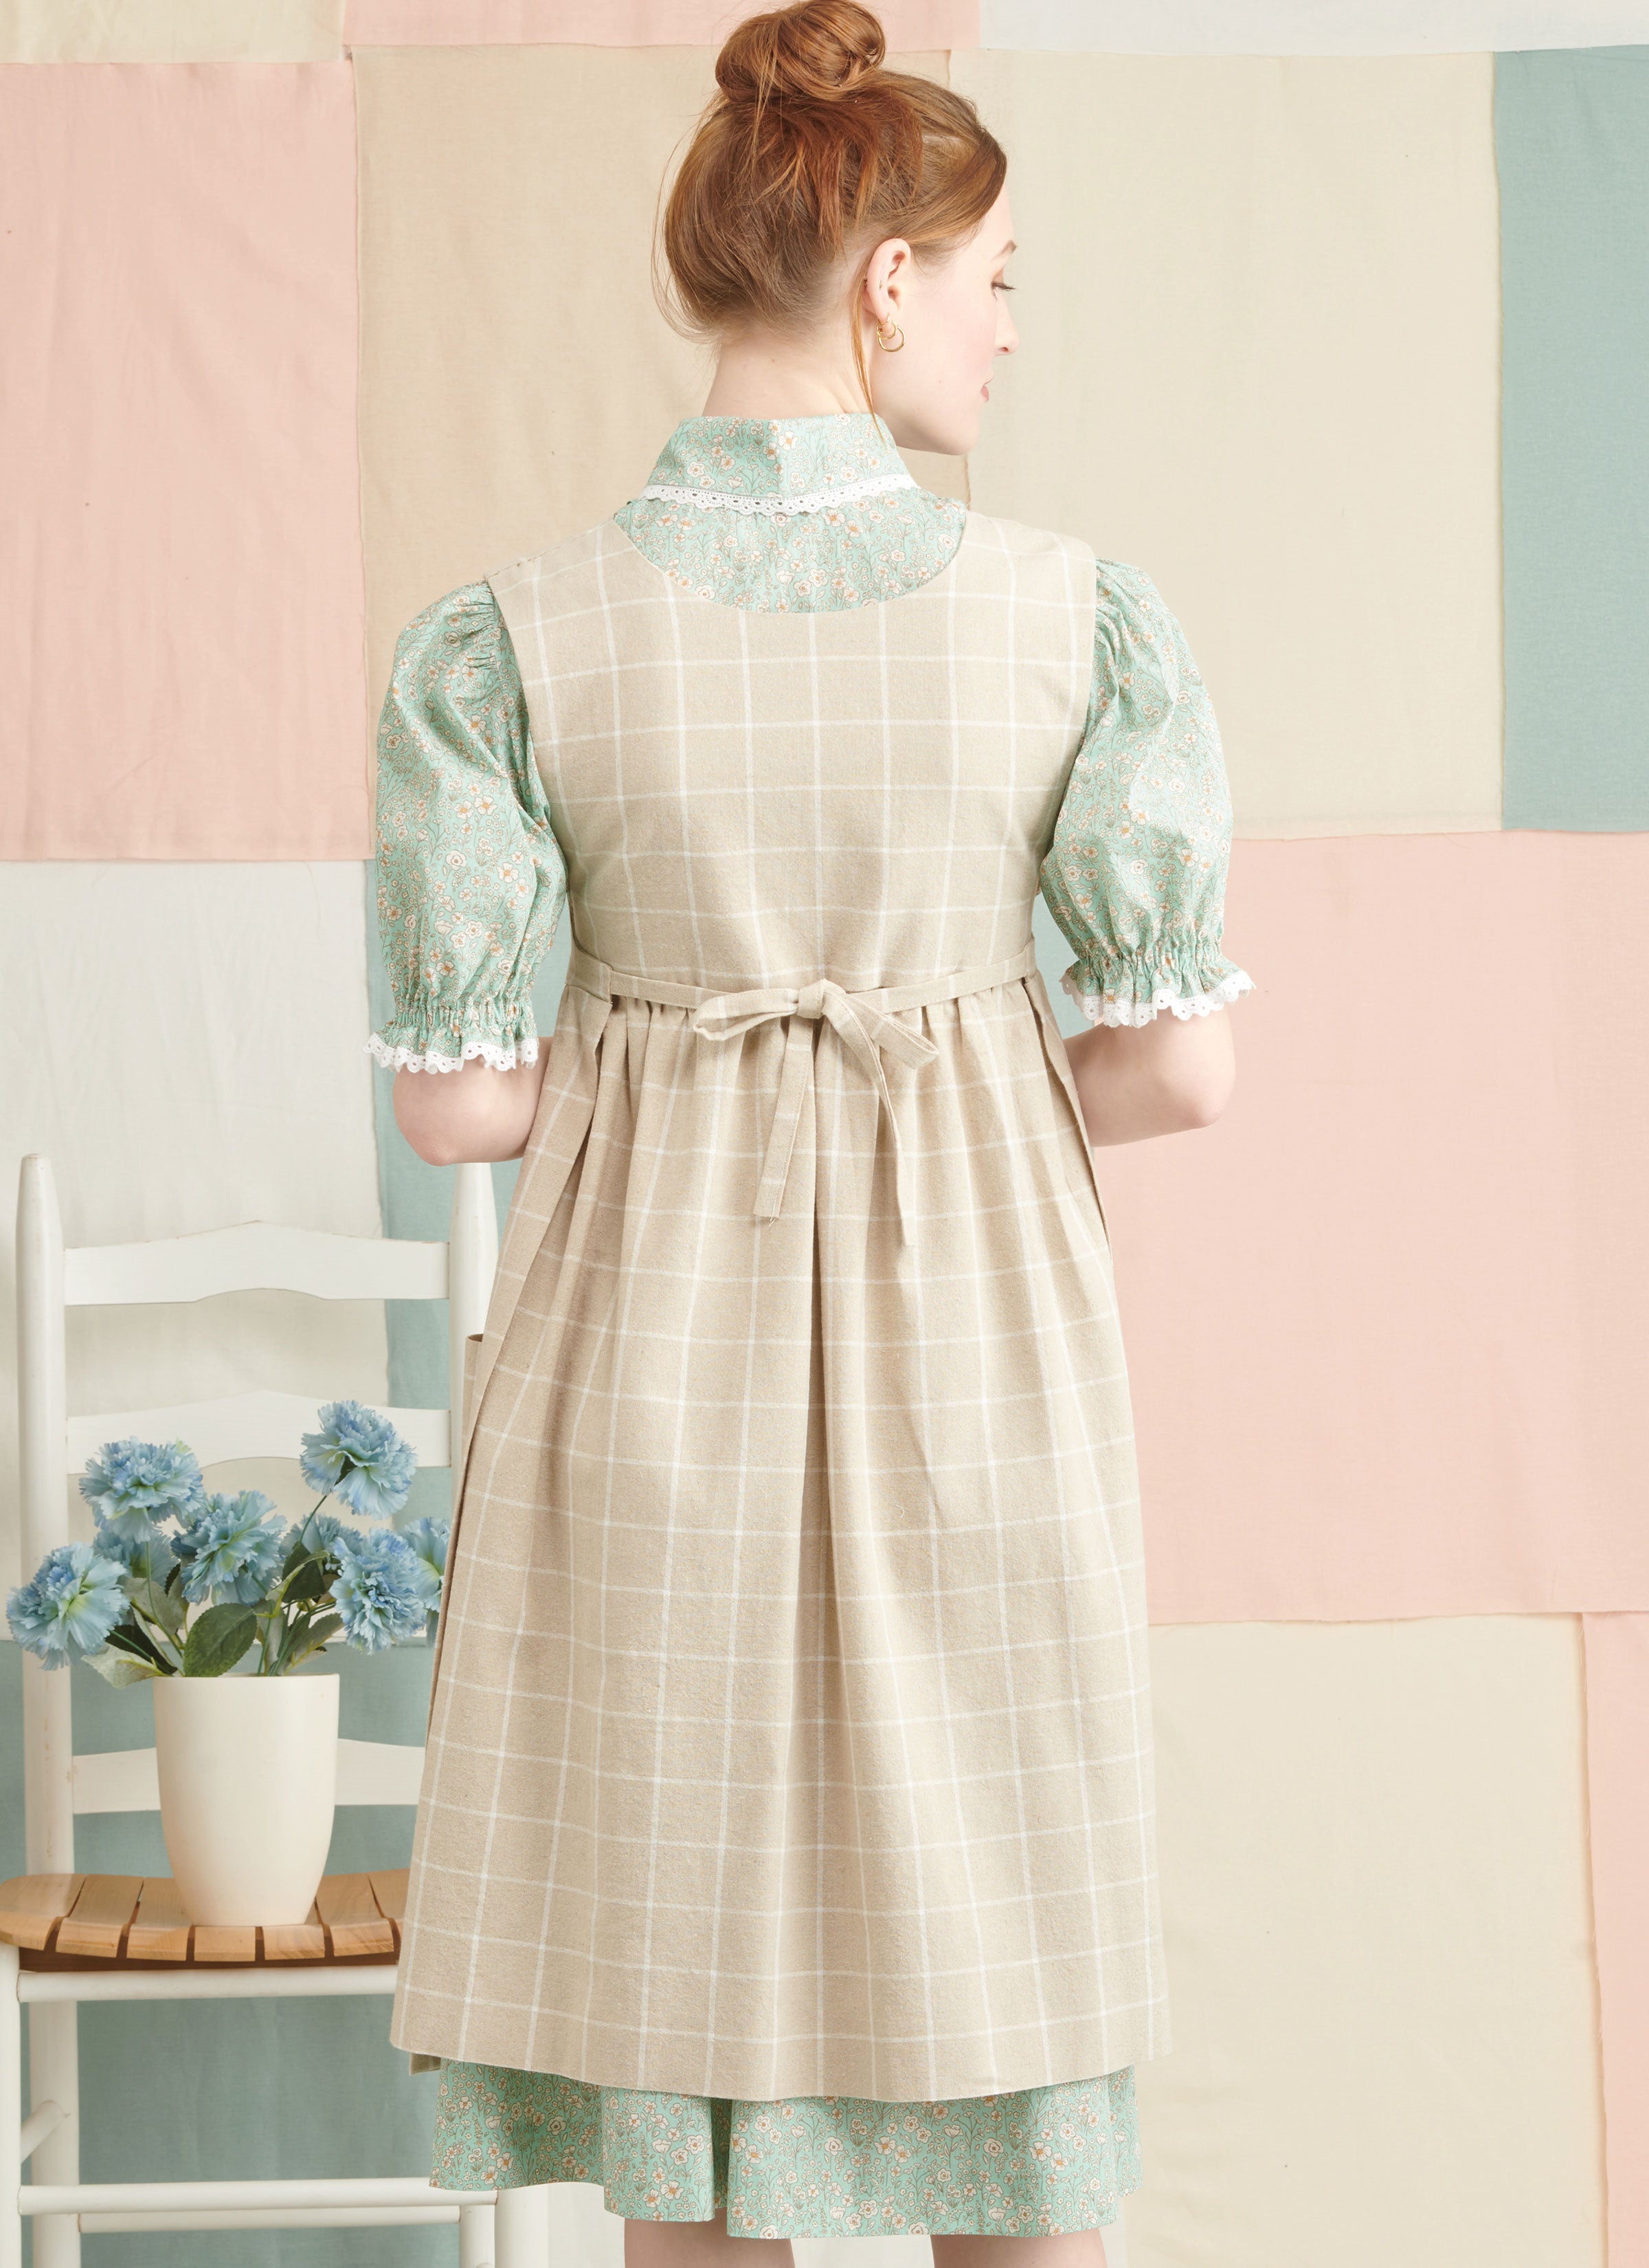 Simplicity sewing pattern 9835 Misses' Dress and Pinafore Apron by Elaine Heigl Designs from Jaycotts Sewing Supplies